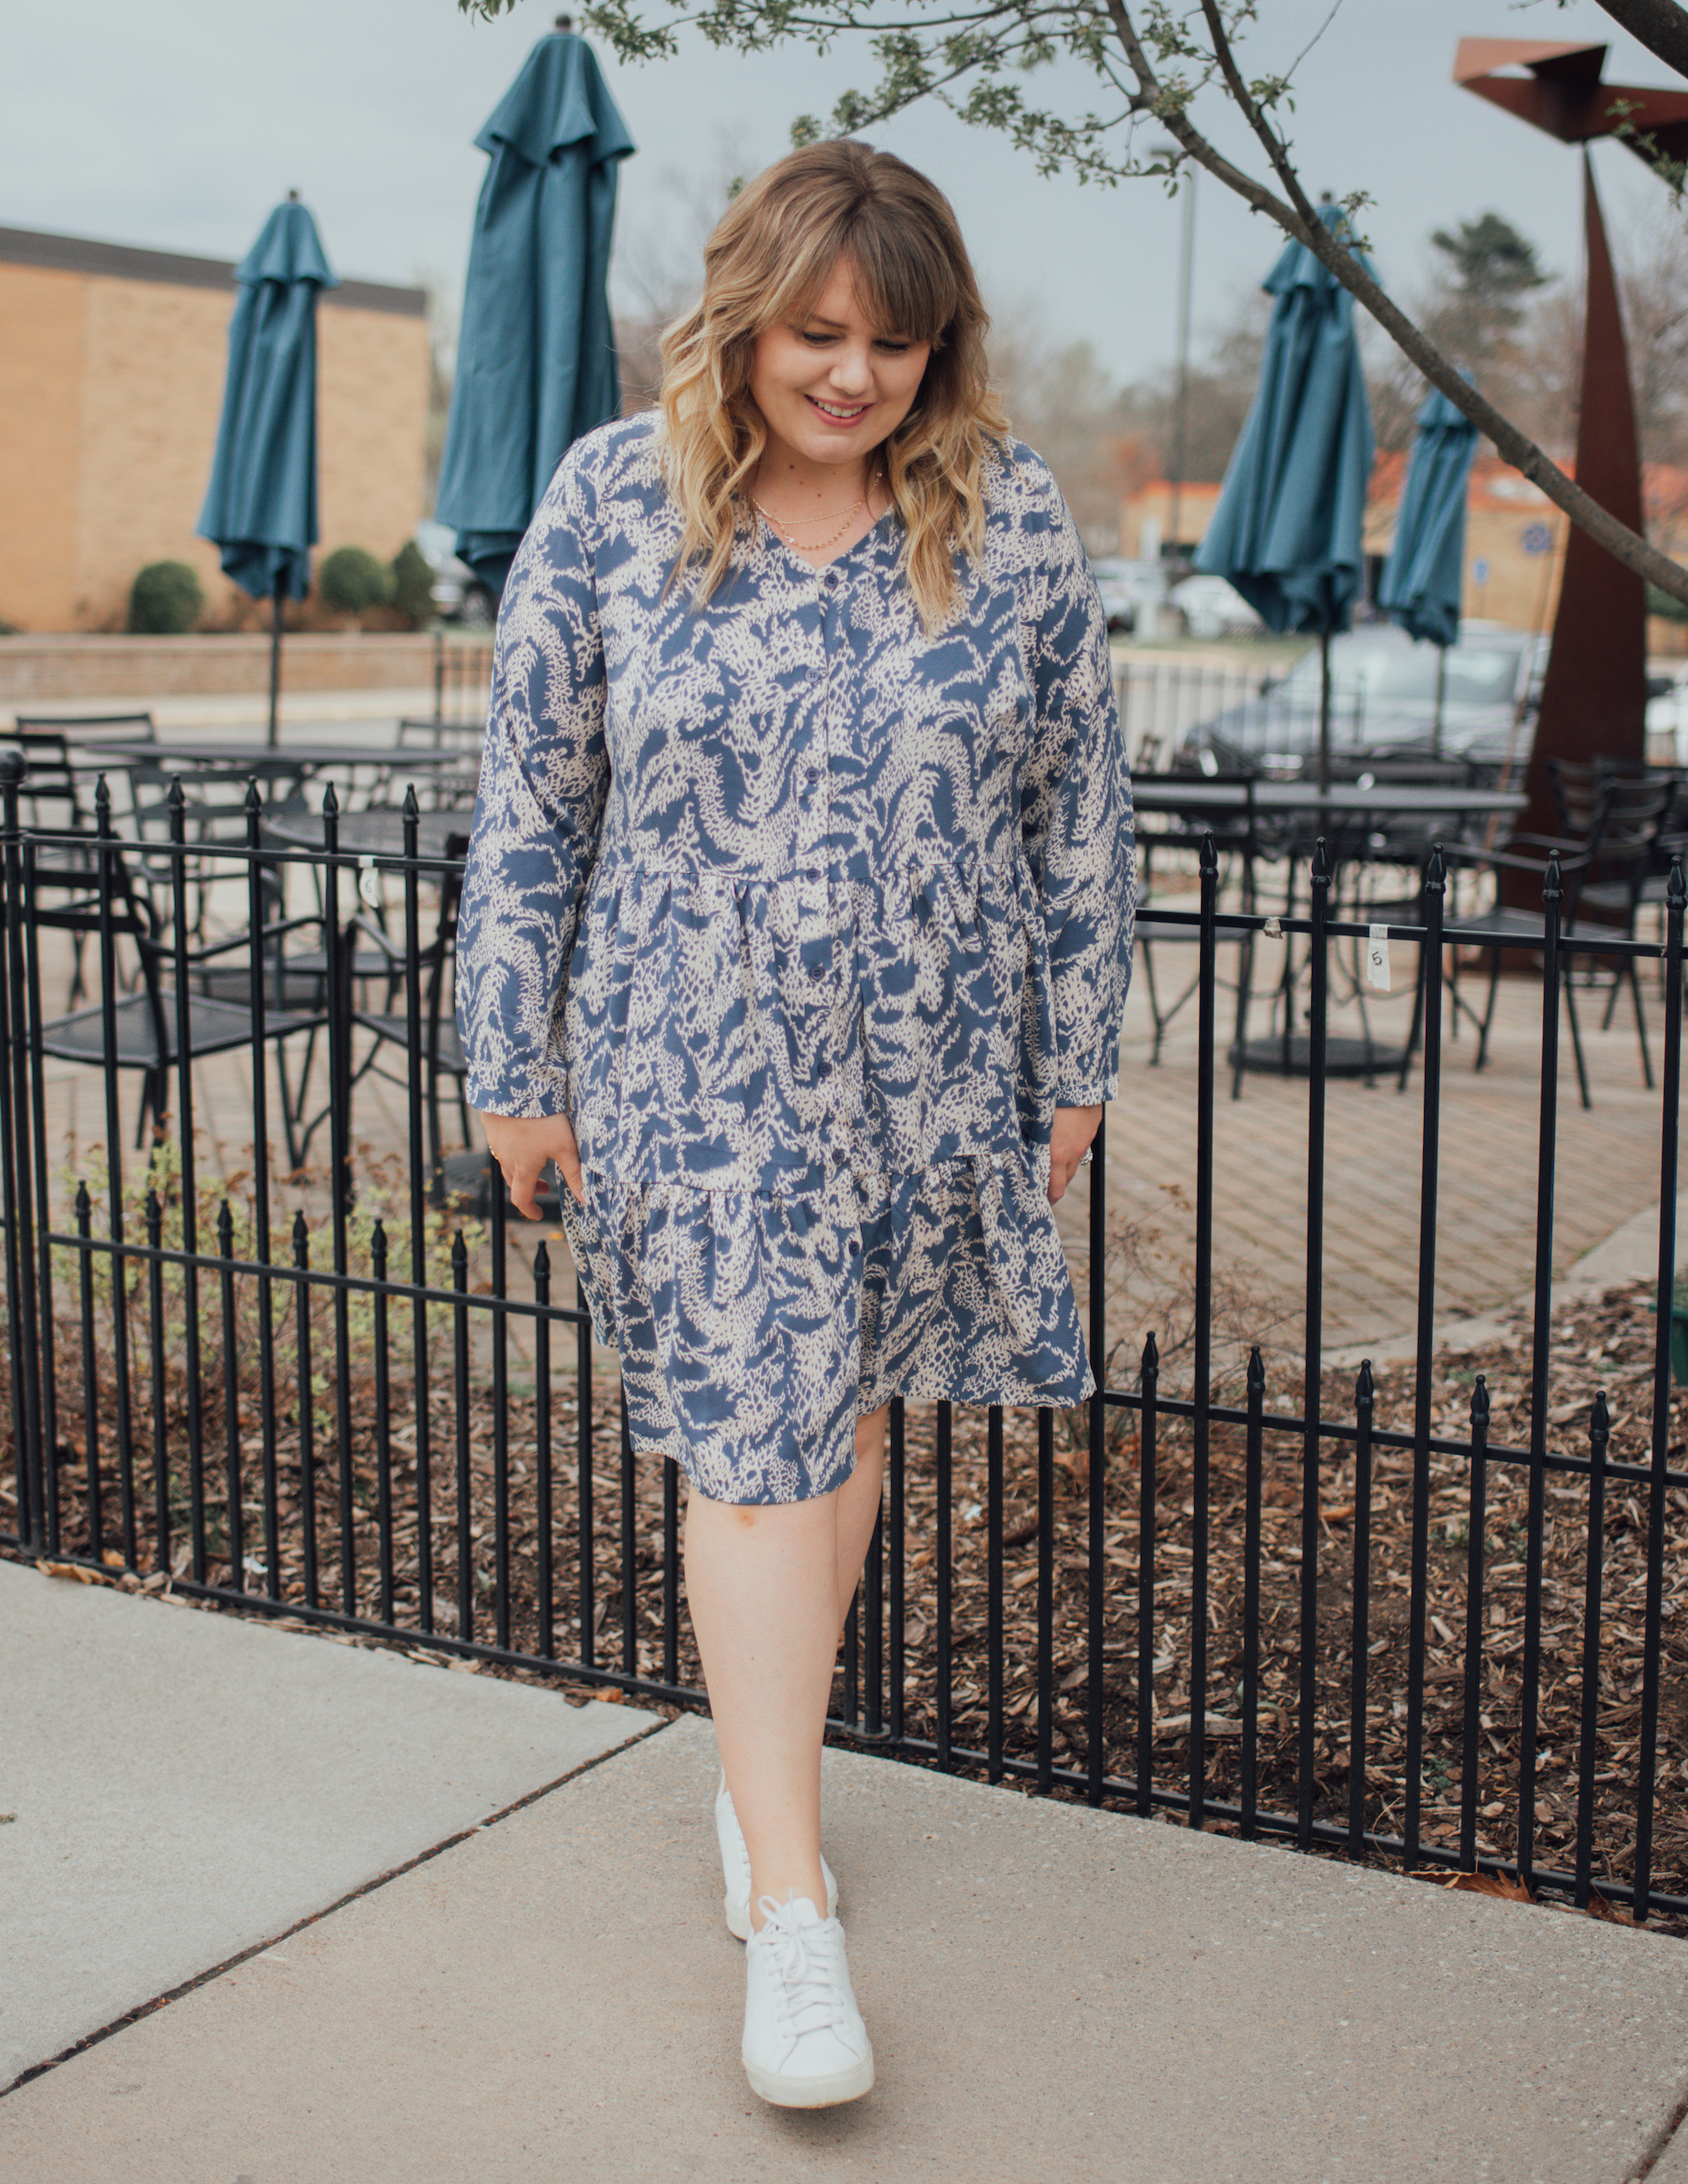 Spring Swing Dress To Love. Sharing some spring and summer swing dresses! A swing dress has with waist that flows away from the body